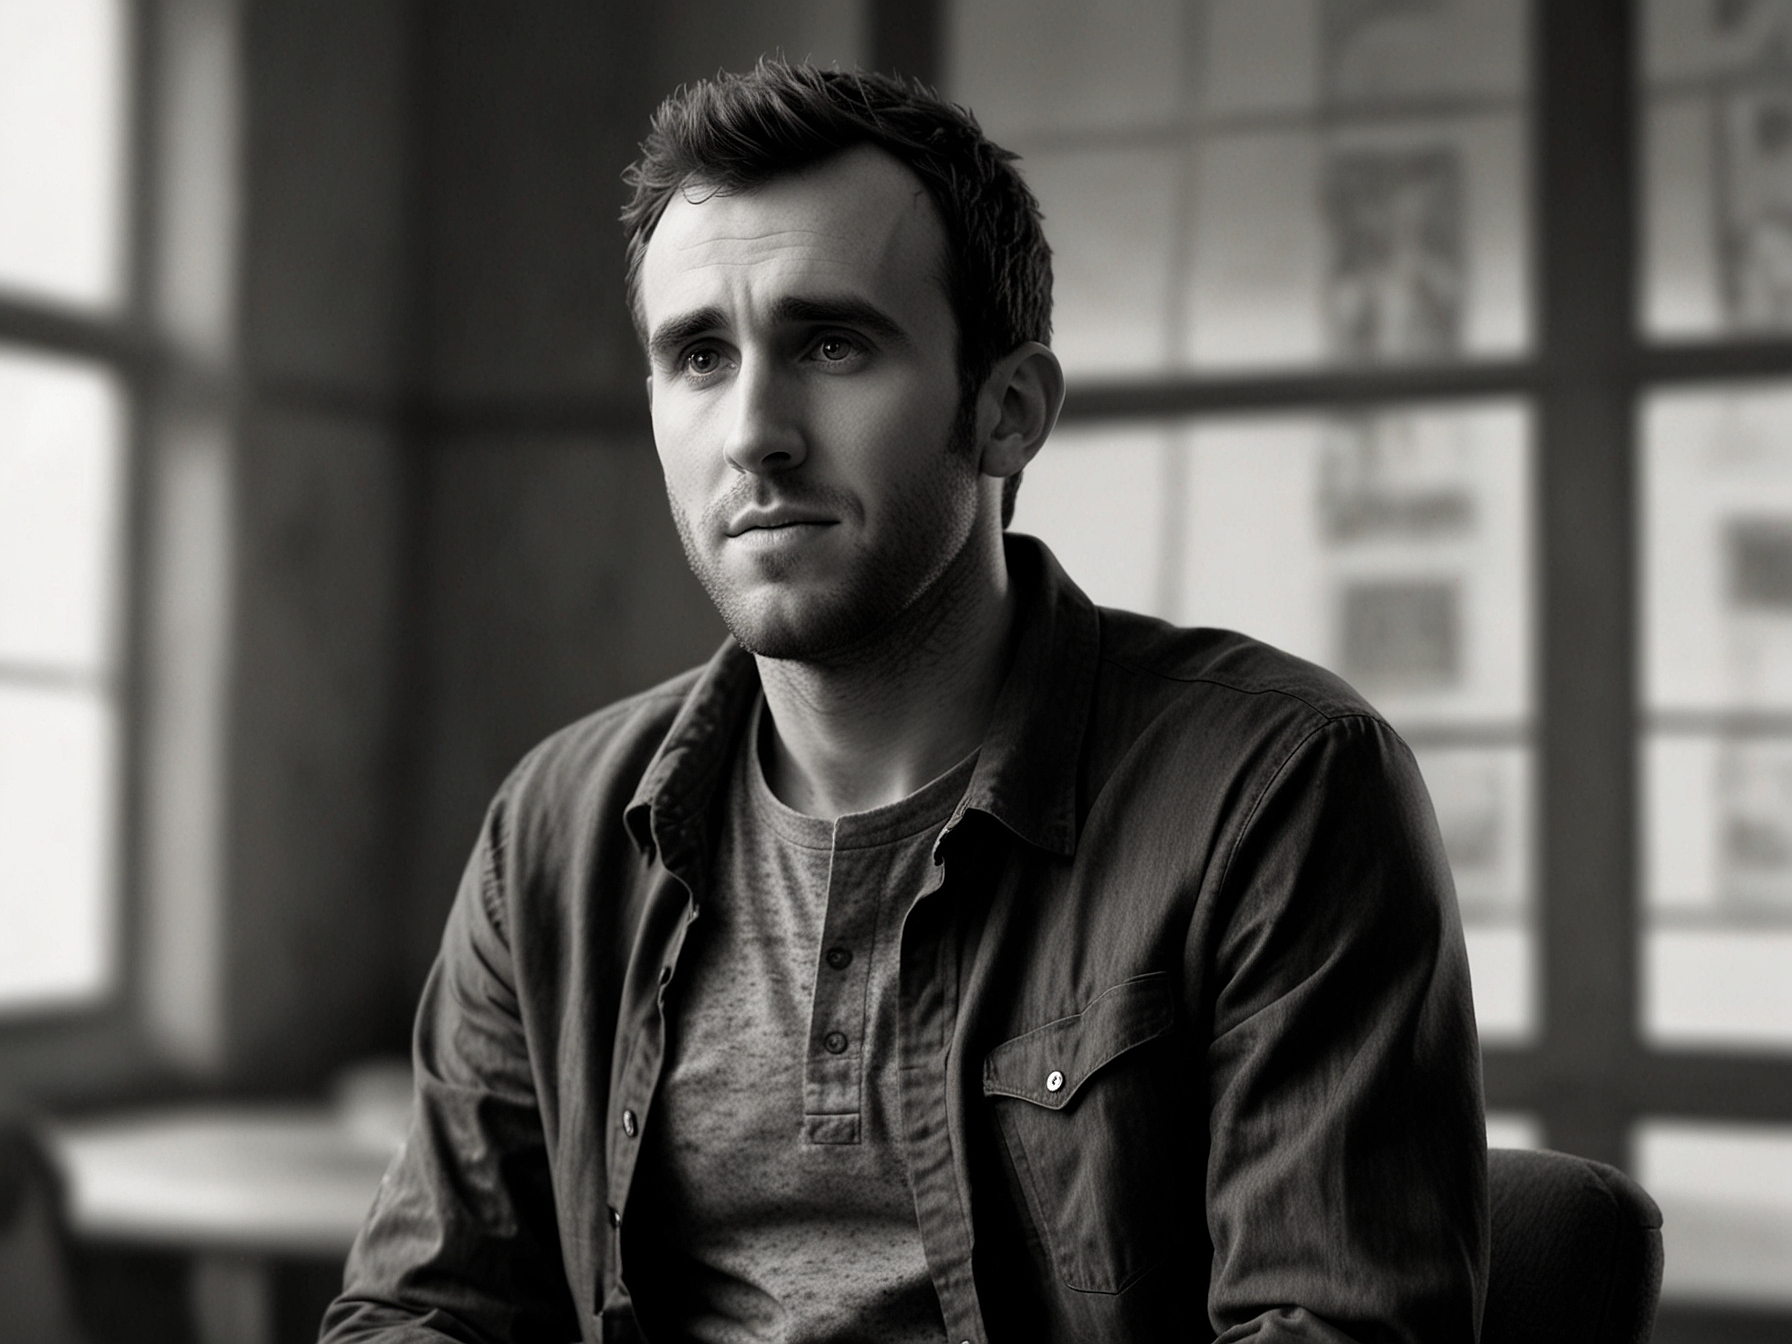 Matthew Lewis in a casual interview setting, discussing his thoughts about returning to the 'Harry Potter' series, illustrating his candid and reflective attitude towards his career choices.